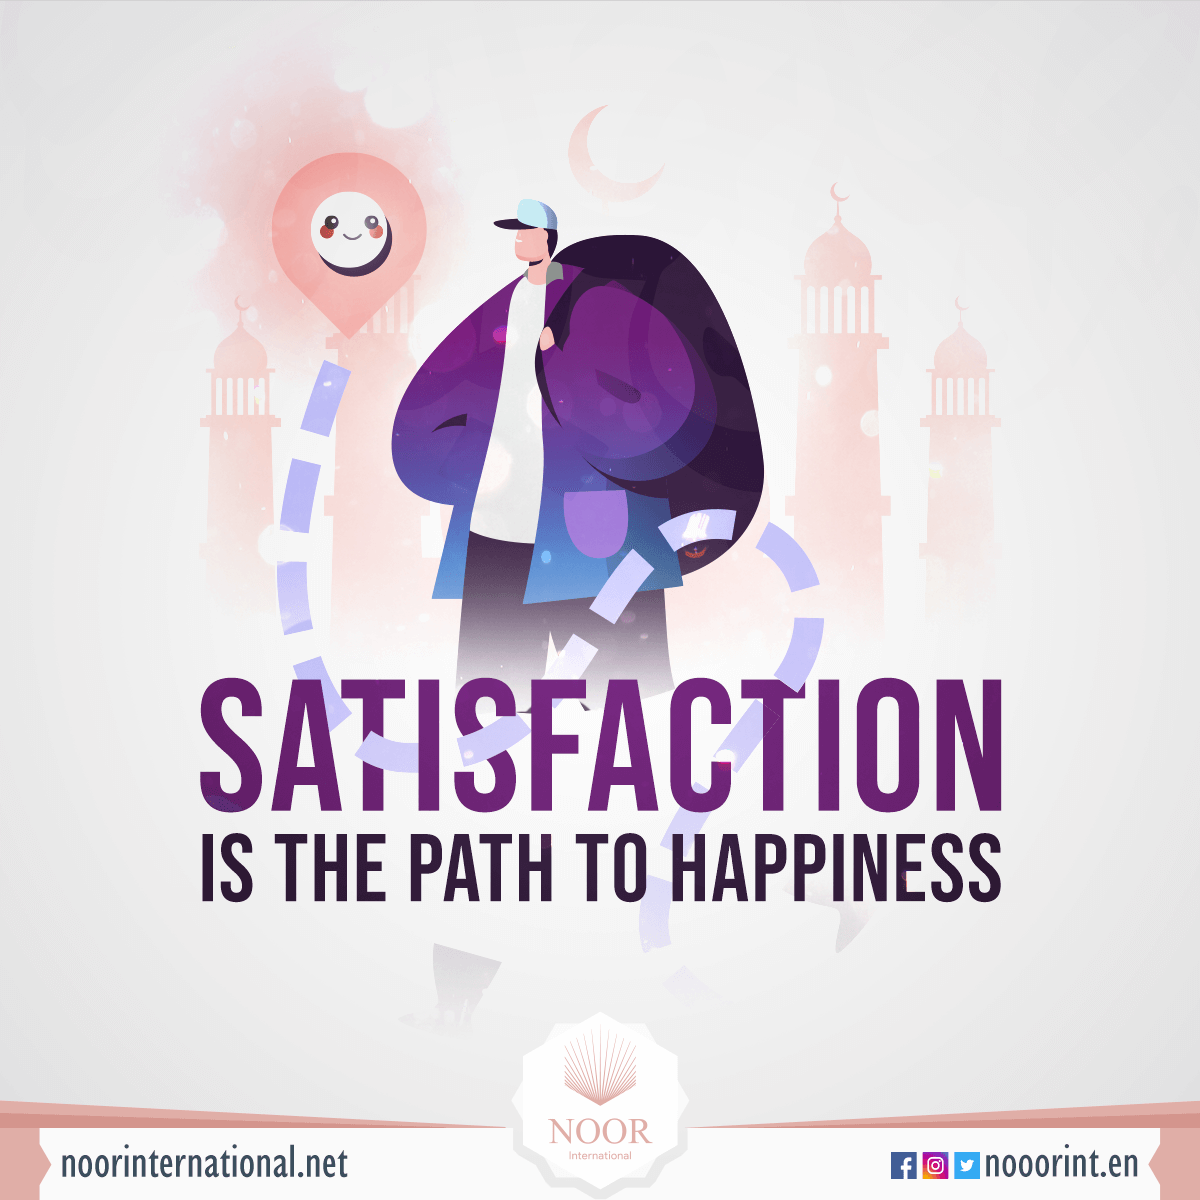 Satisfaction is the path to happiness